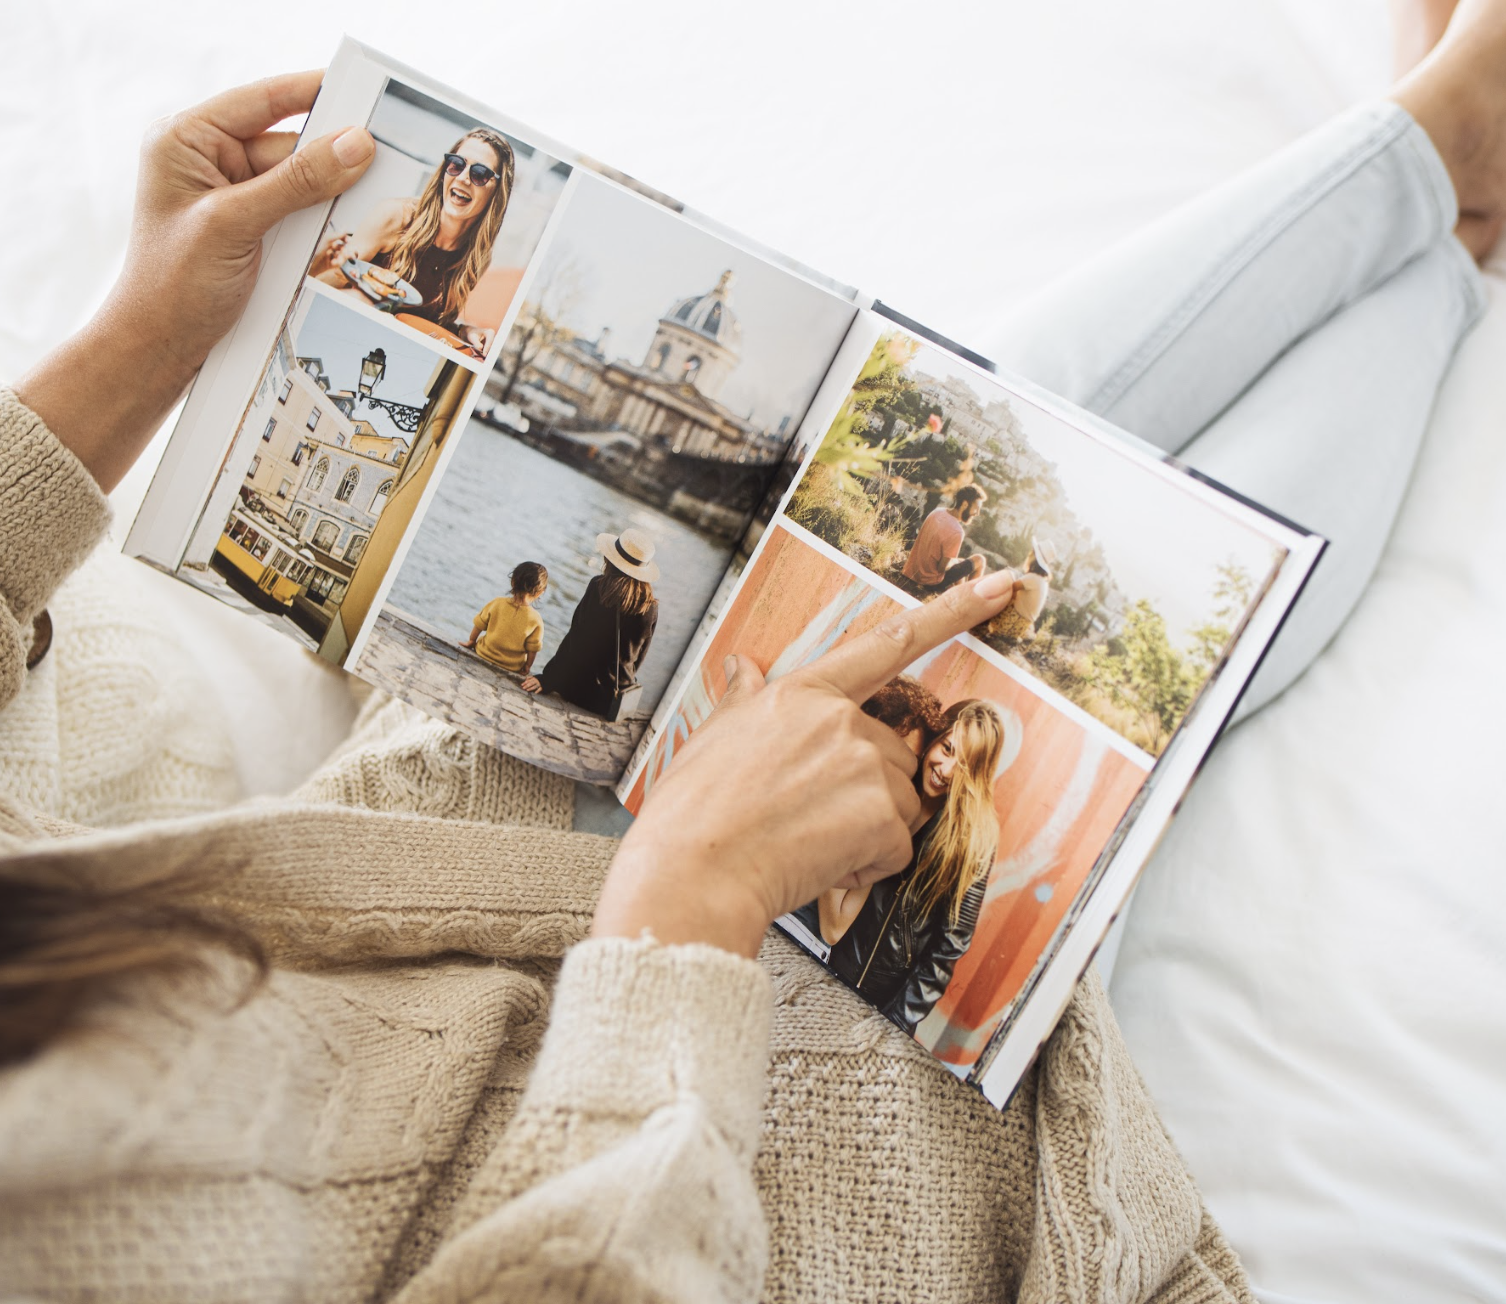 Facebook Photo Album Title Ideas For Your Next Photo Book Project — Mixbook  Inspiration